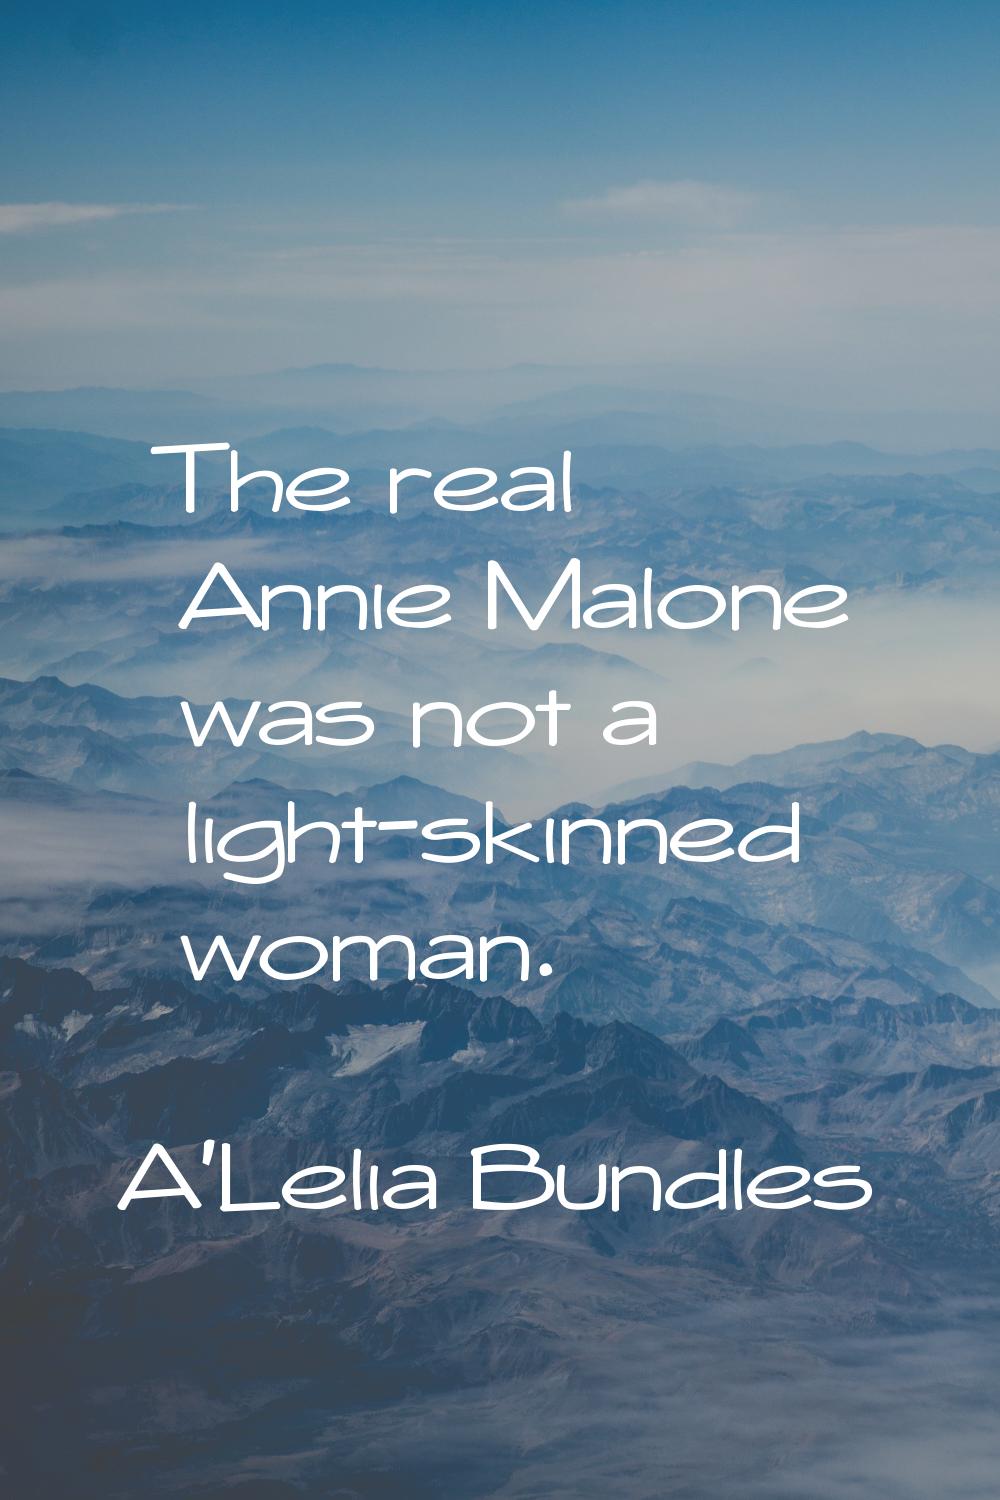 The real Annie Malone was not a light-skinned woman.